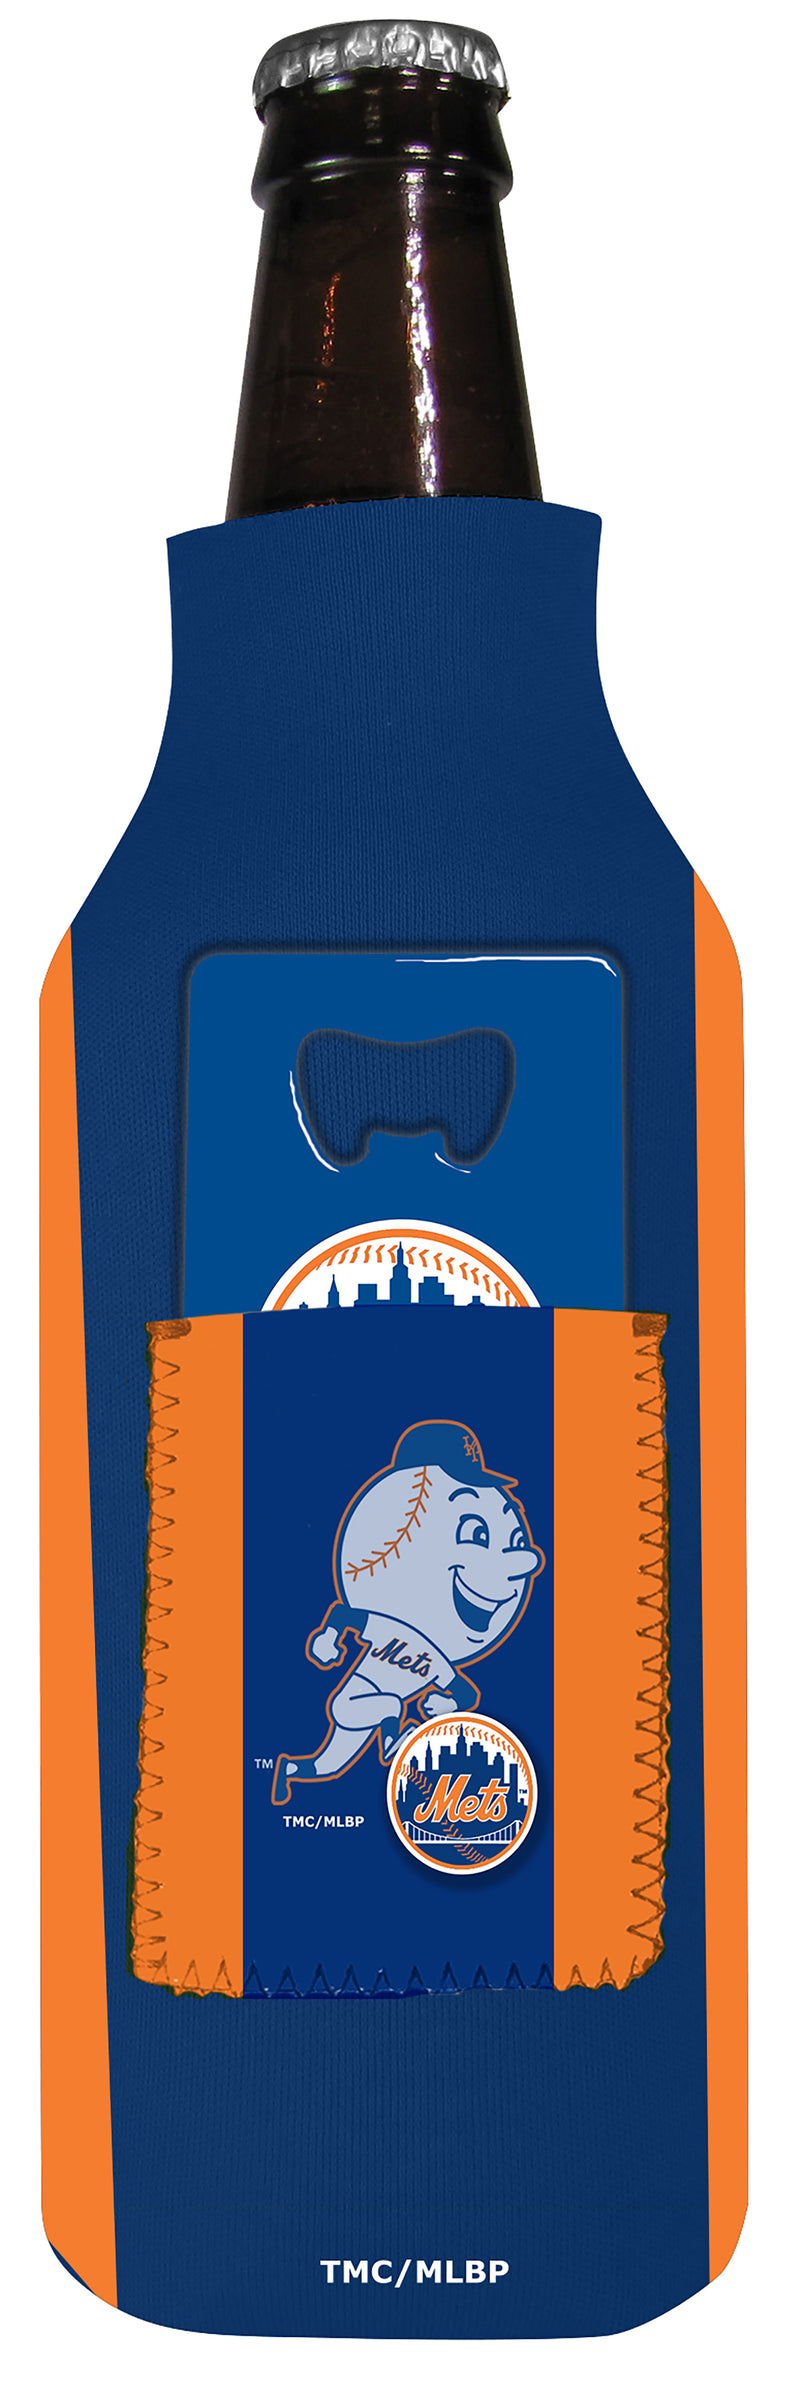 Bottle Insulator w/Opener | New York Mets
MLB, New York Mets, NYM, OldProduct
The Memory Company